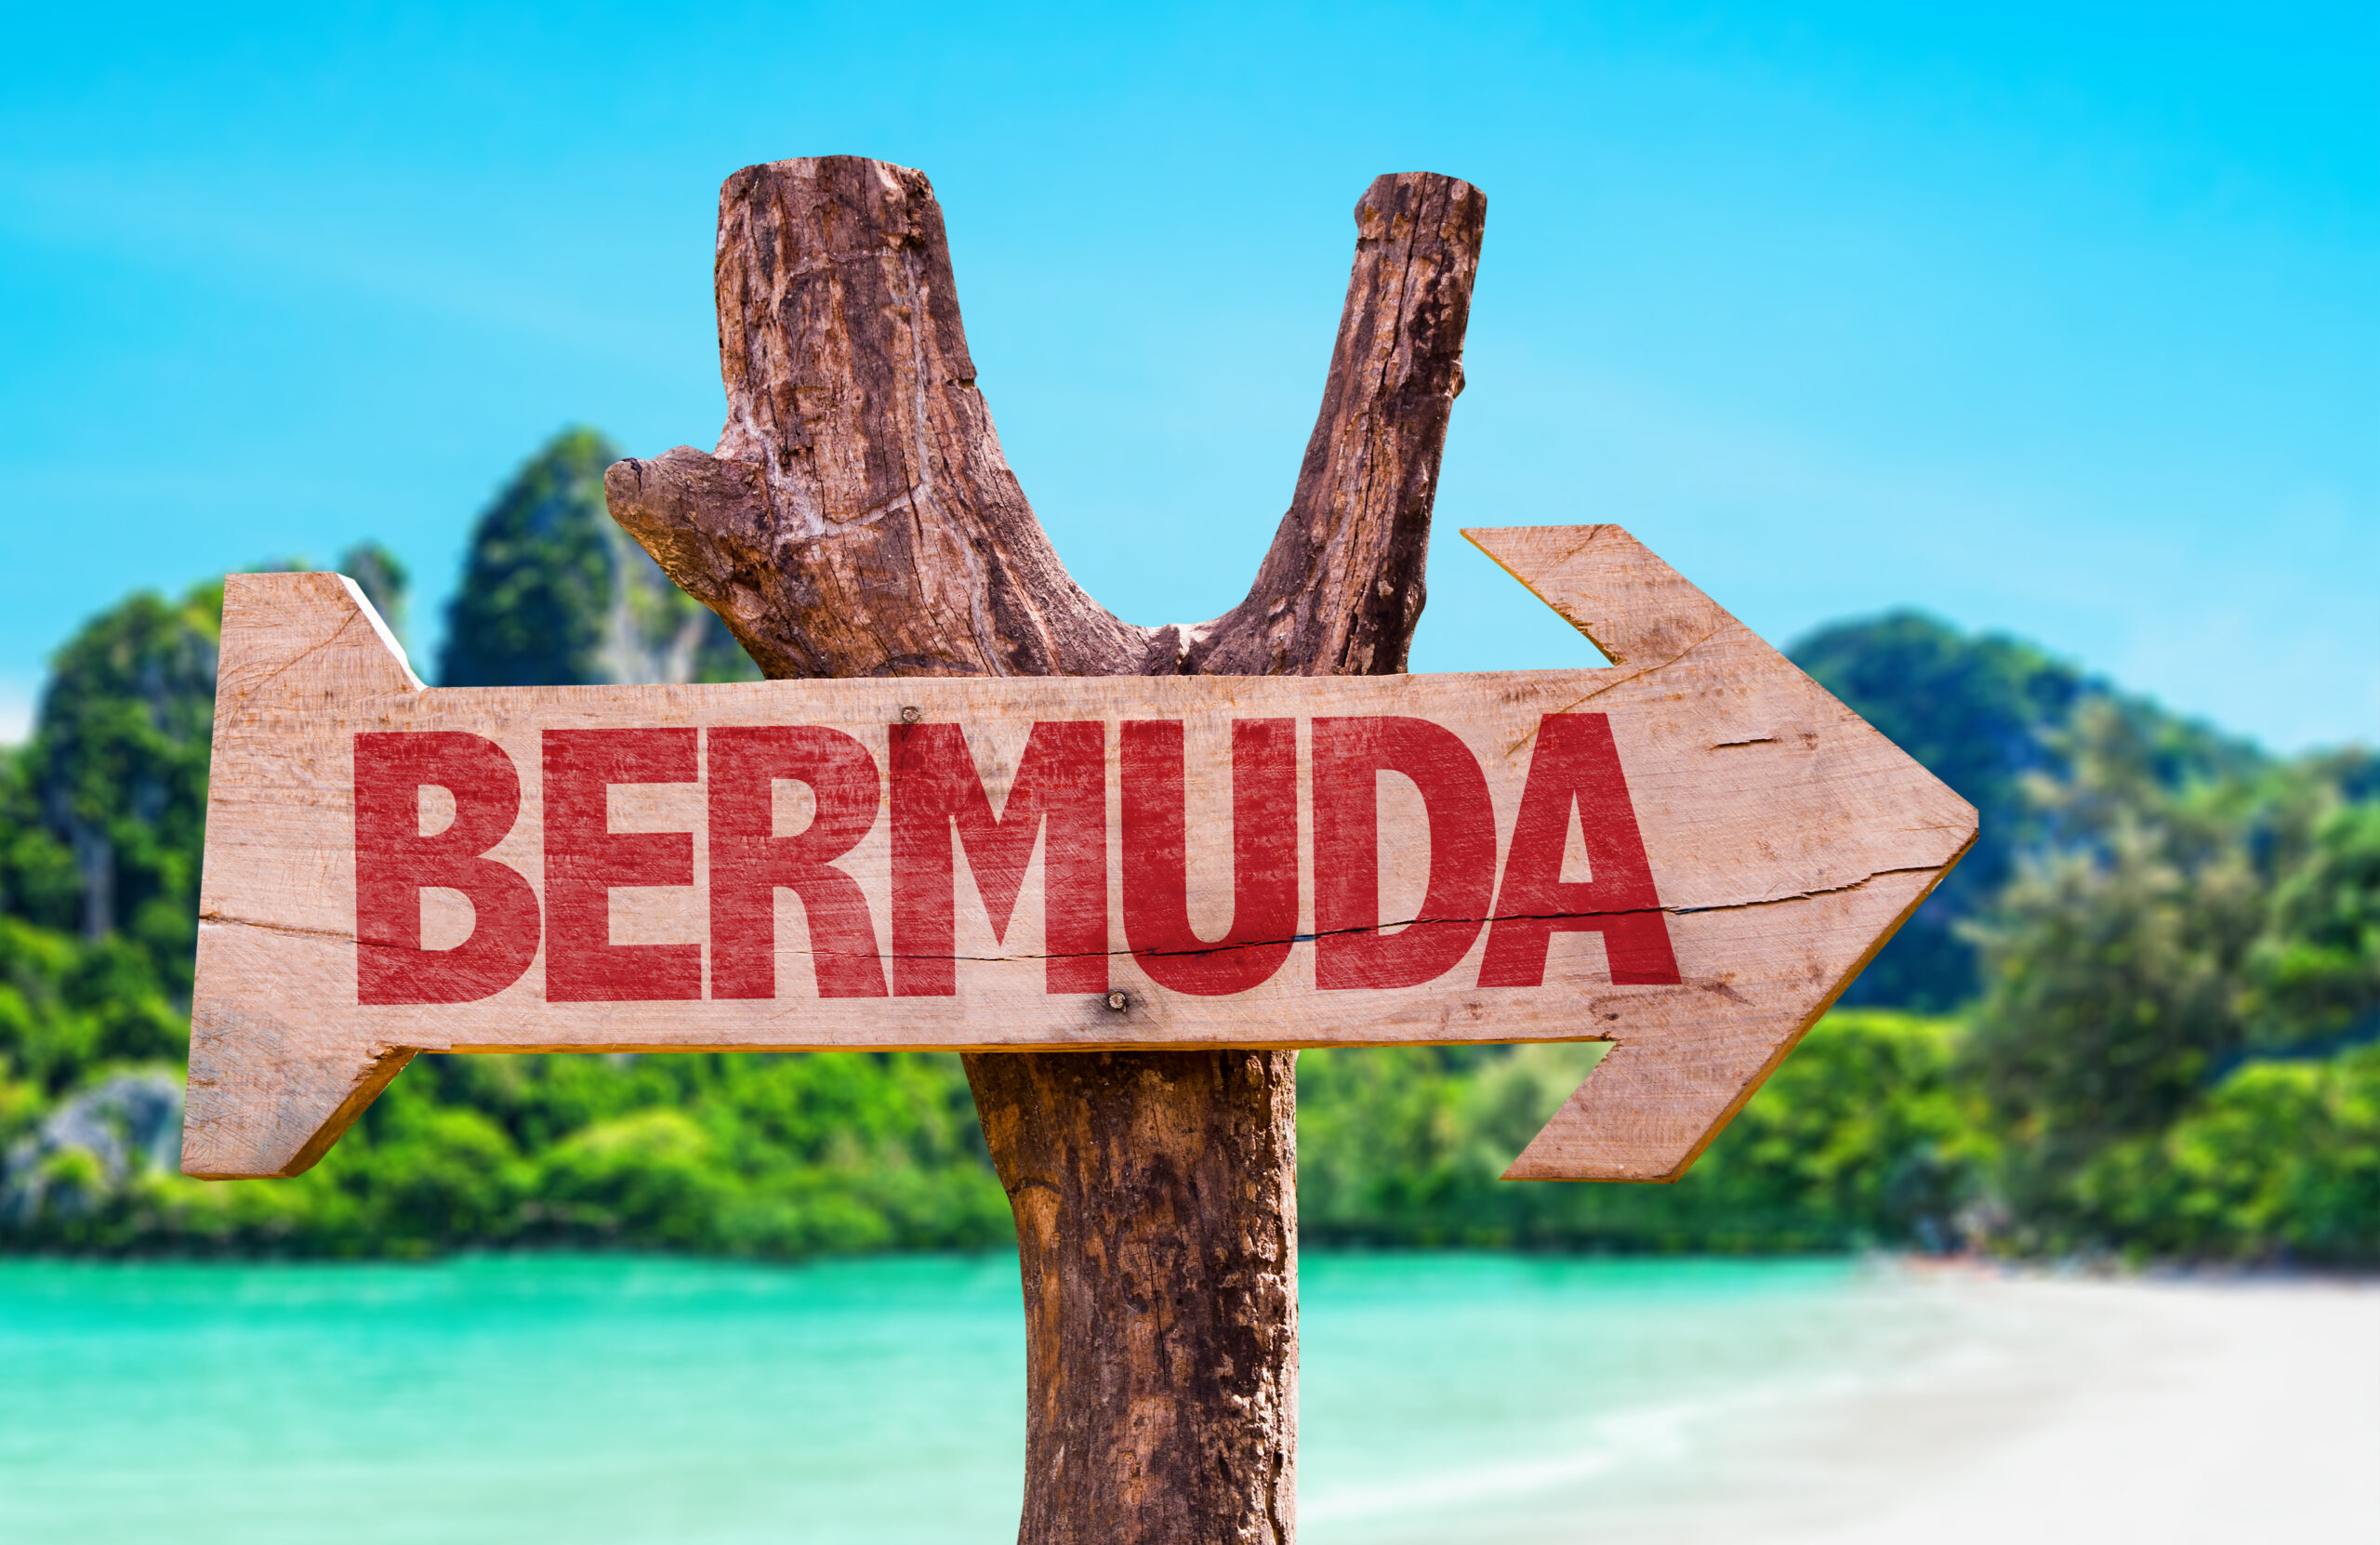 Bermuda wooden sign with beach background